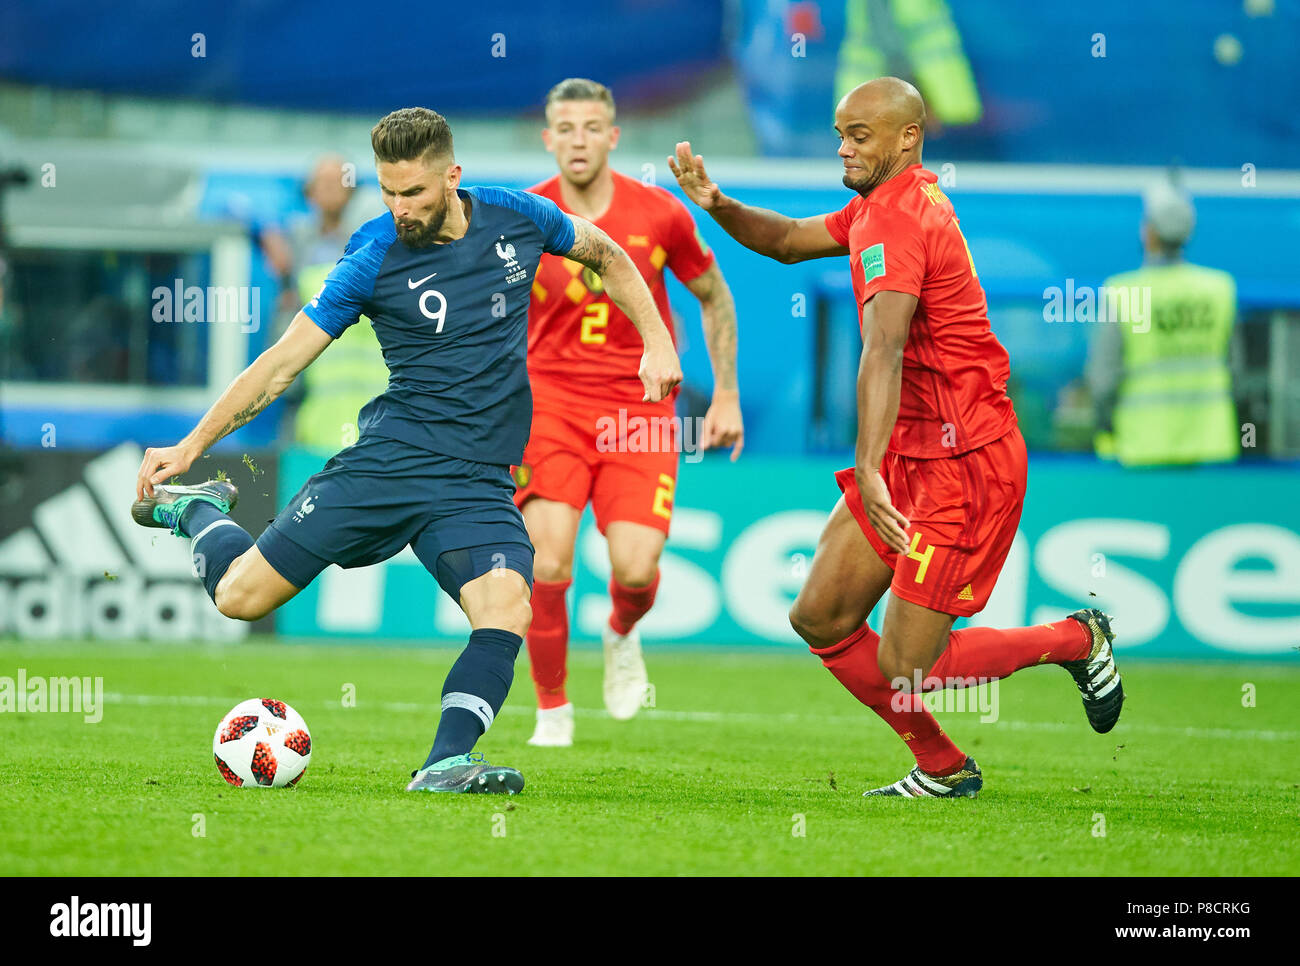 Belgium - France, Soccer, Saint Petersburg, July 10, 2018 Olivier GIROUD, FRA 9  compete for the ball, tackling, duel, header against Vincent KOMPANY, Belgium Nr.4  BELGIUM  - FRANCE  0-1 FIFA WORLD CUP 2018 RUSSIA, Semifinal, Season 2018/2019,  July 10, 2018 in Saint Petersburg, Russia. © Peter Schatz / Alamy Live News Stock Photo